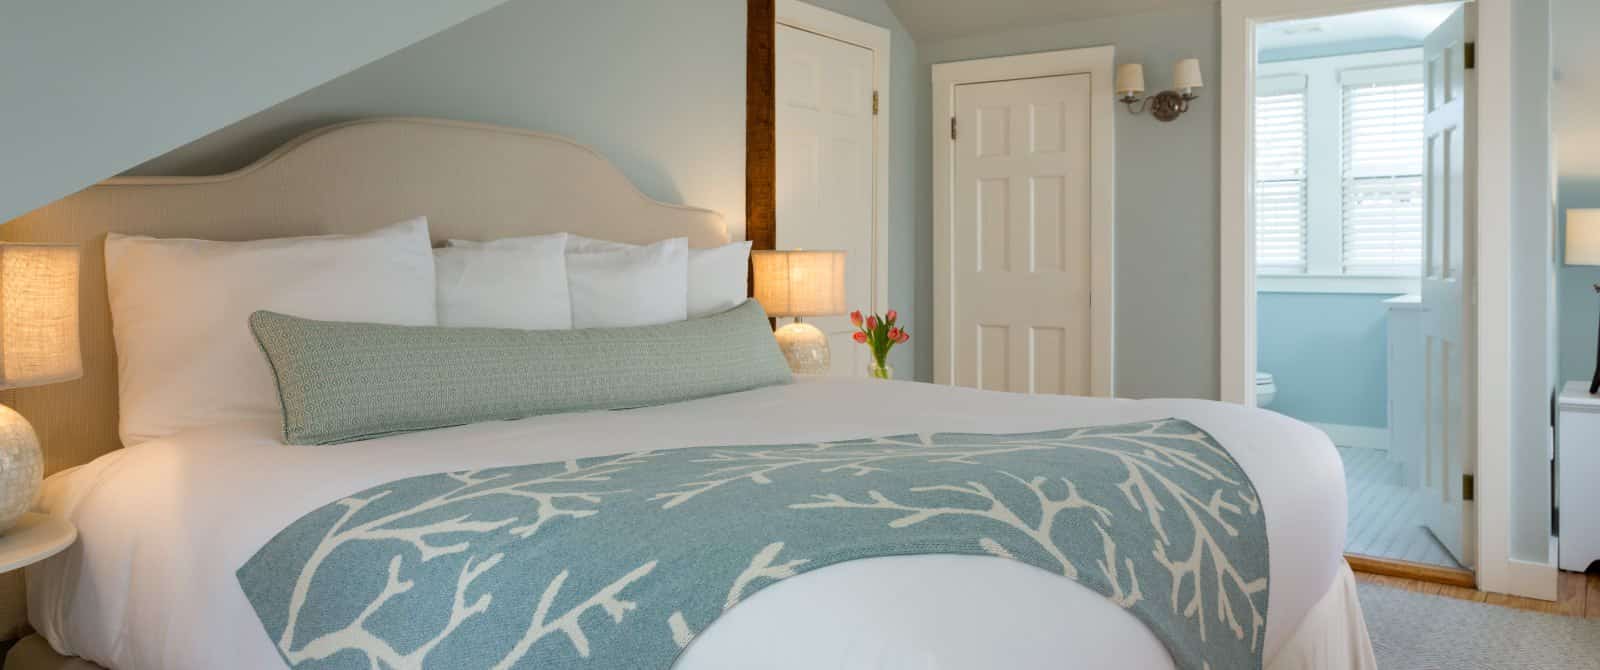 Bedroom with light blue walls, cream upholstered headboard, white bedding, and view into bathroom